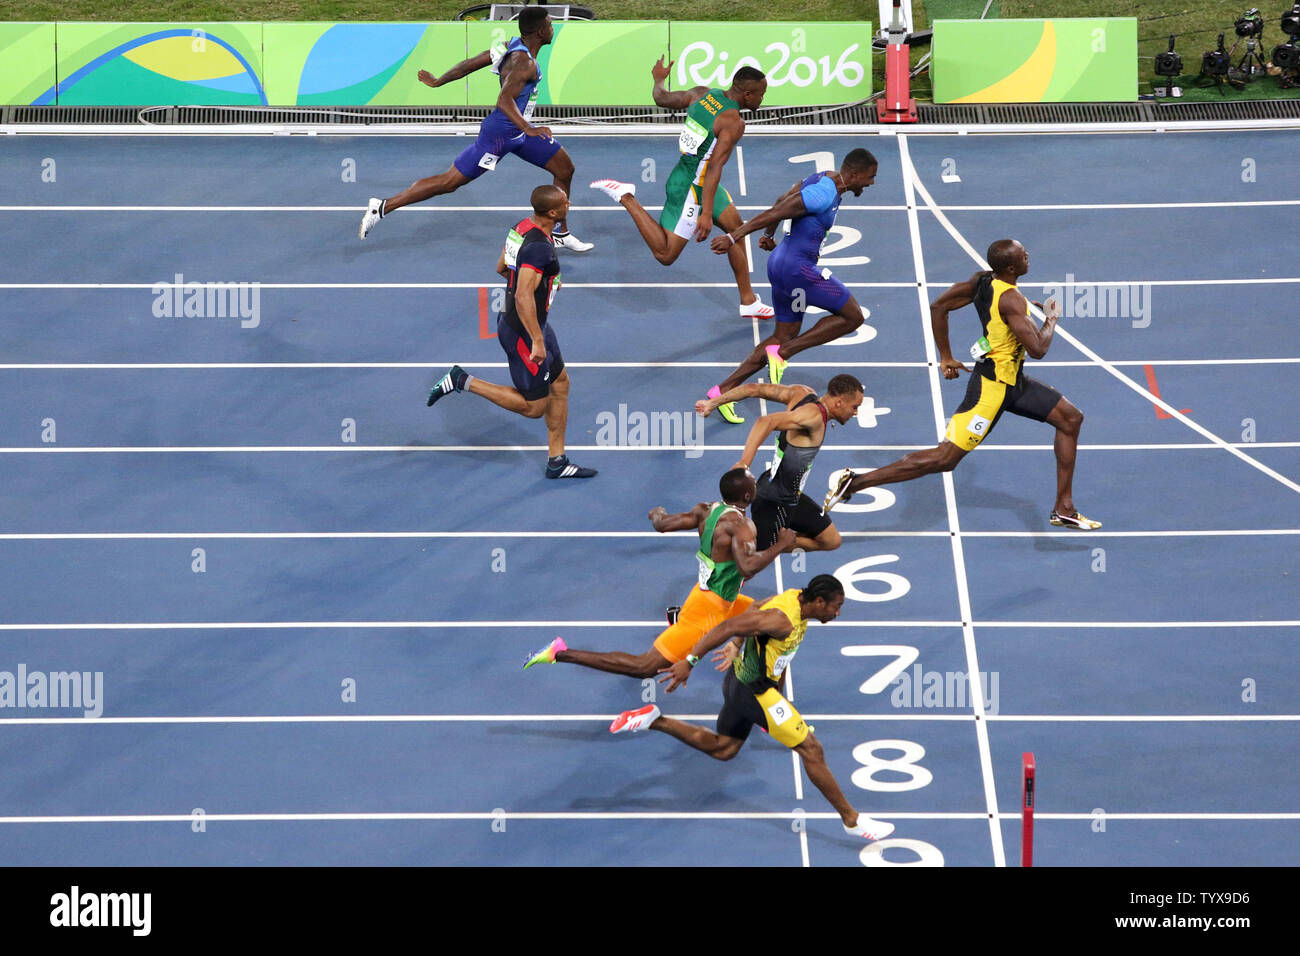 Jamaica's Usain Bolt wins the Men's 100M final at Olympic Stadium at the  2016 Rio Summer Olympics in Rio de Janeiro, Brazil, on August 14, 2016.  Bolt won gold with a time